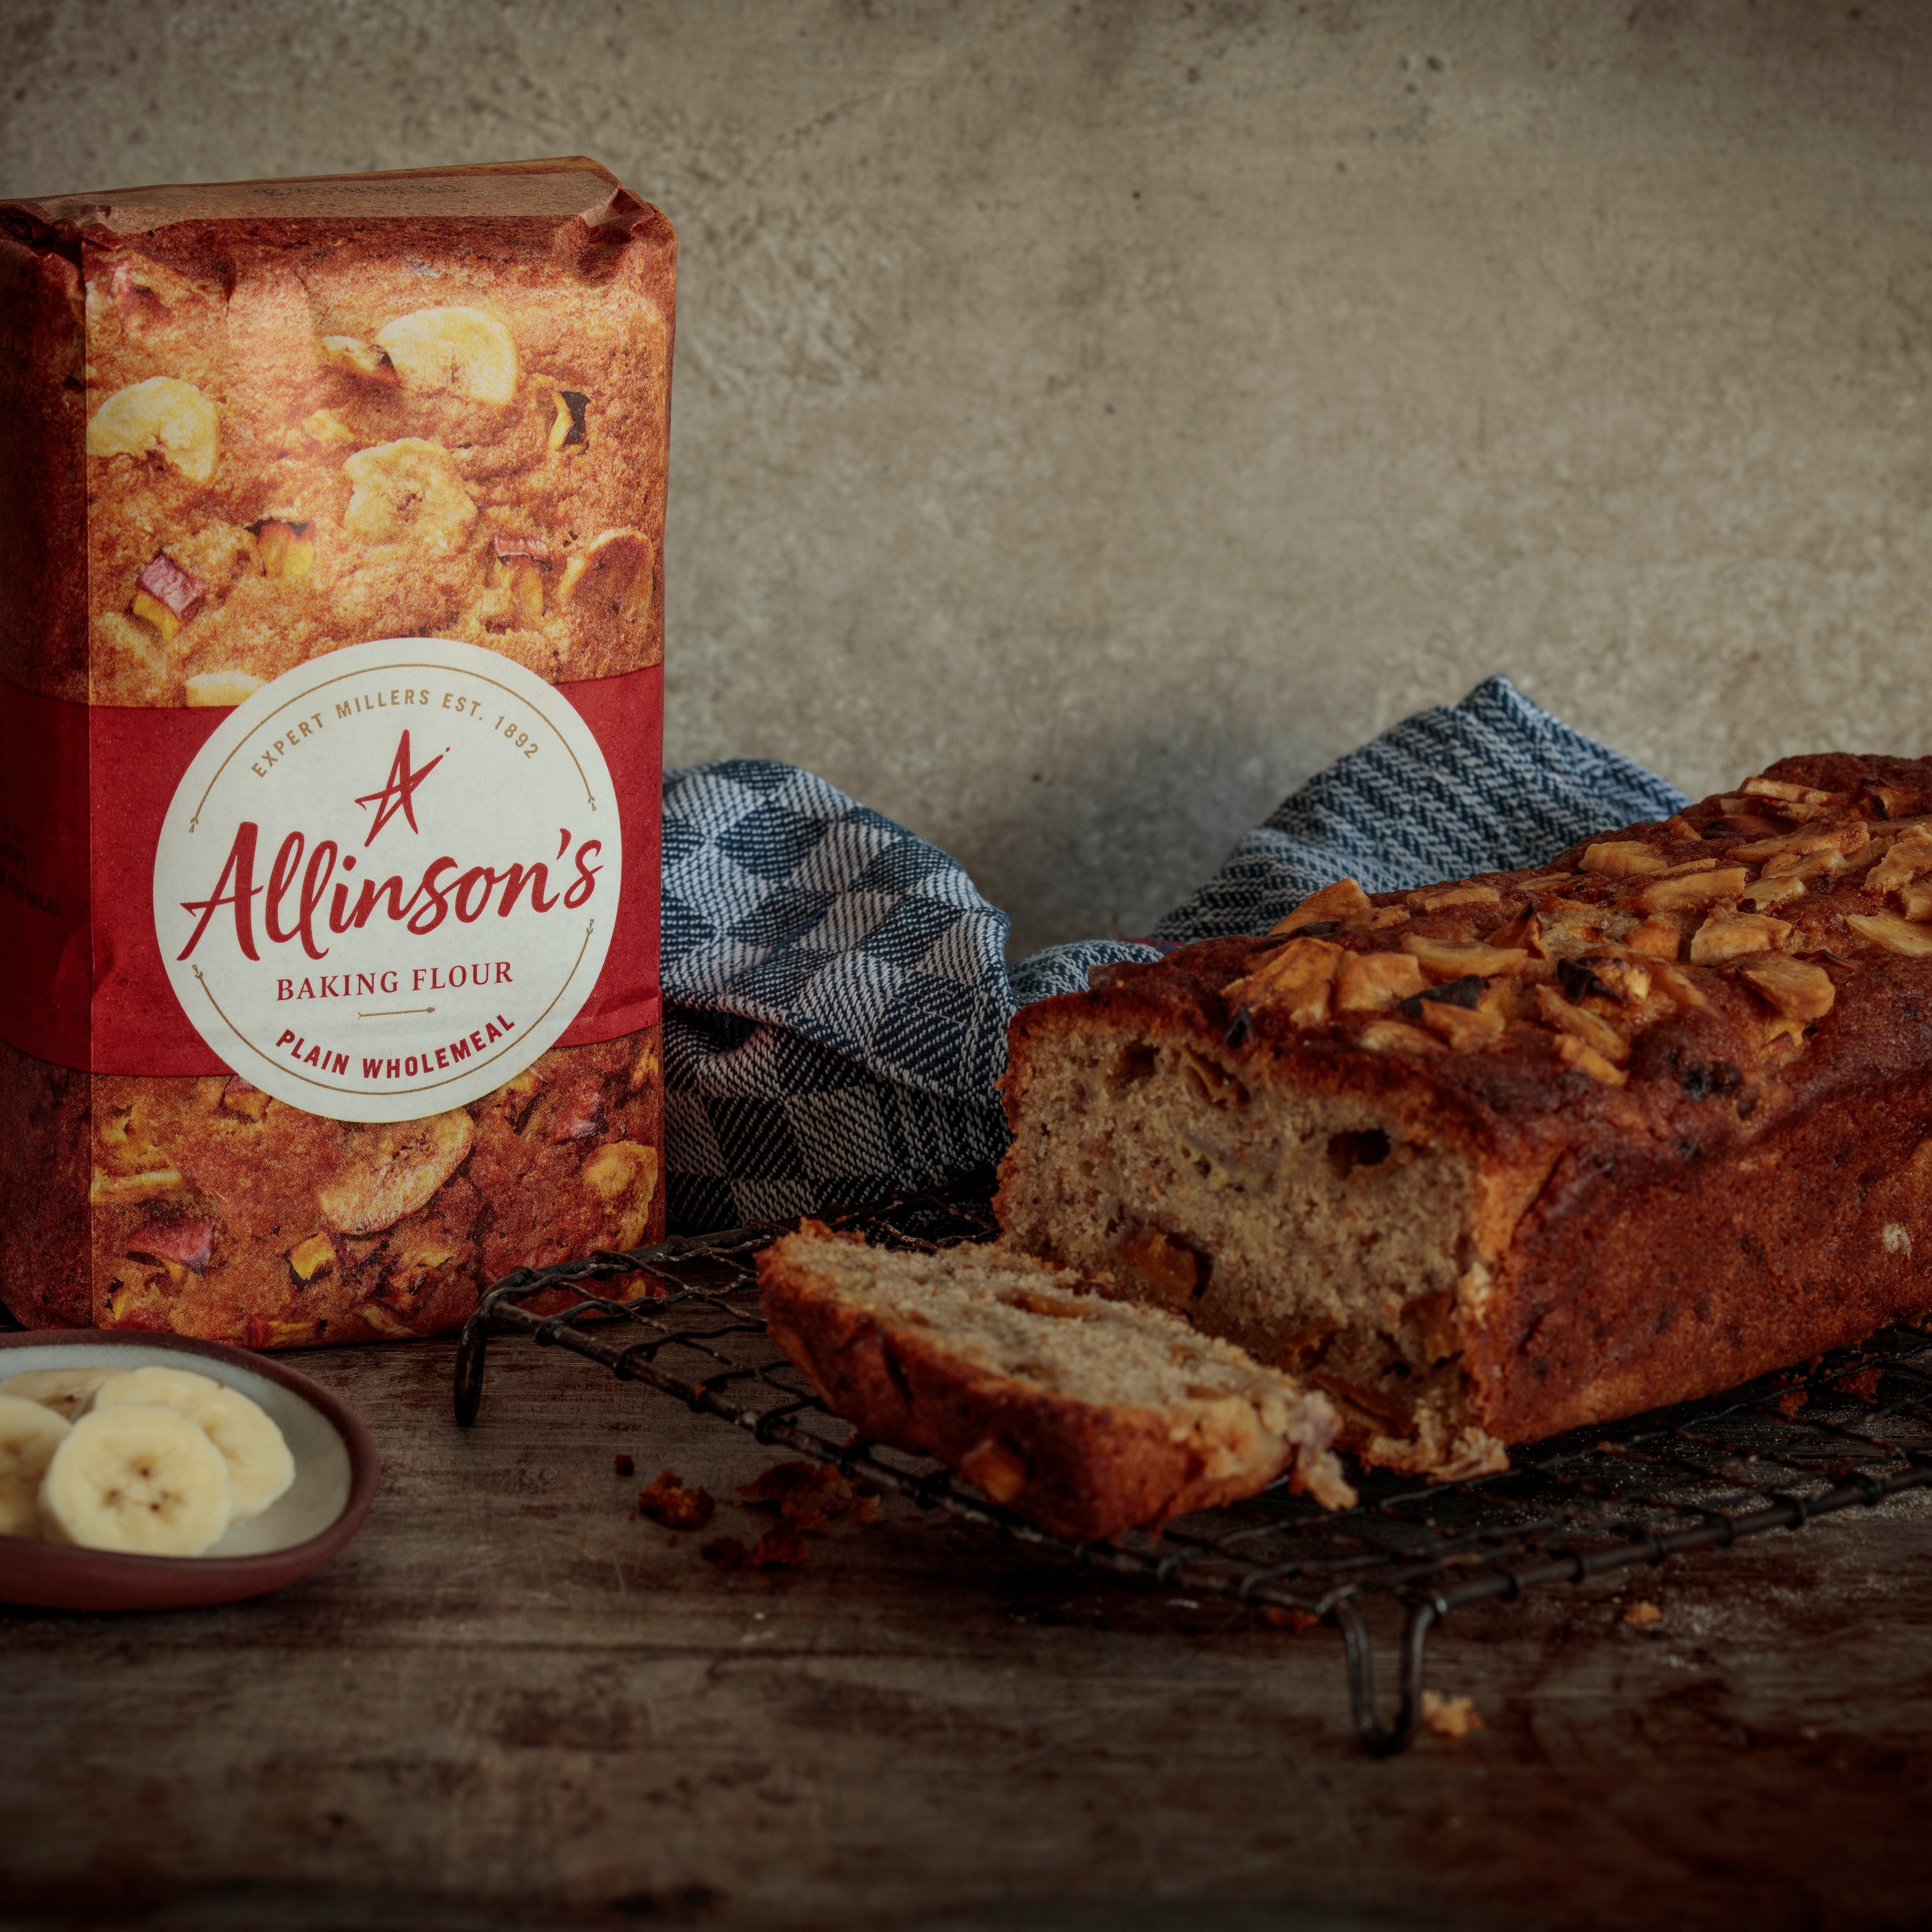 Banana-and-Peaches-Loaf-Allinson-s.jpg